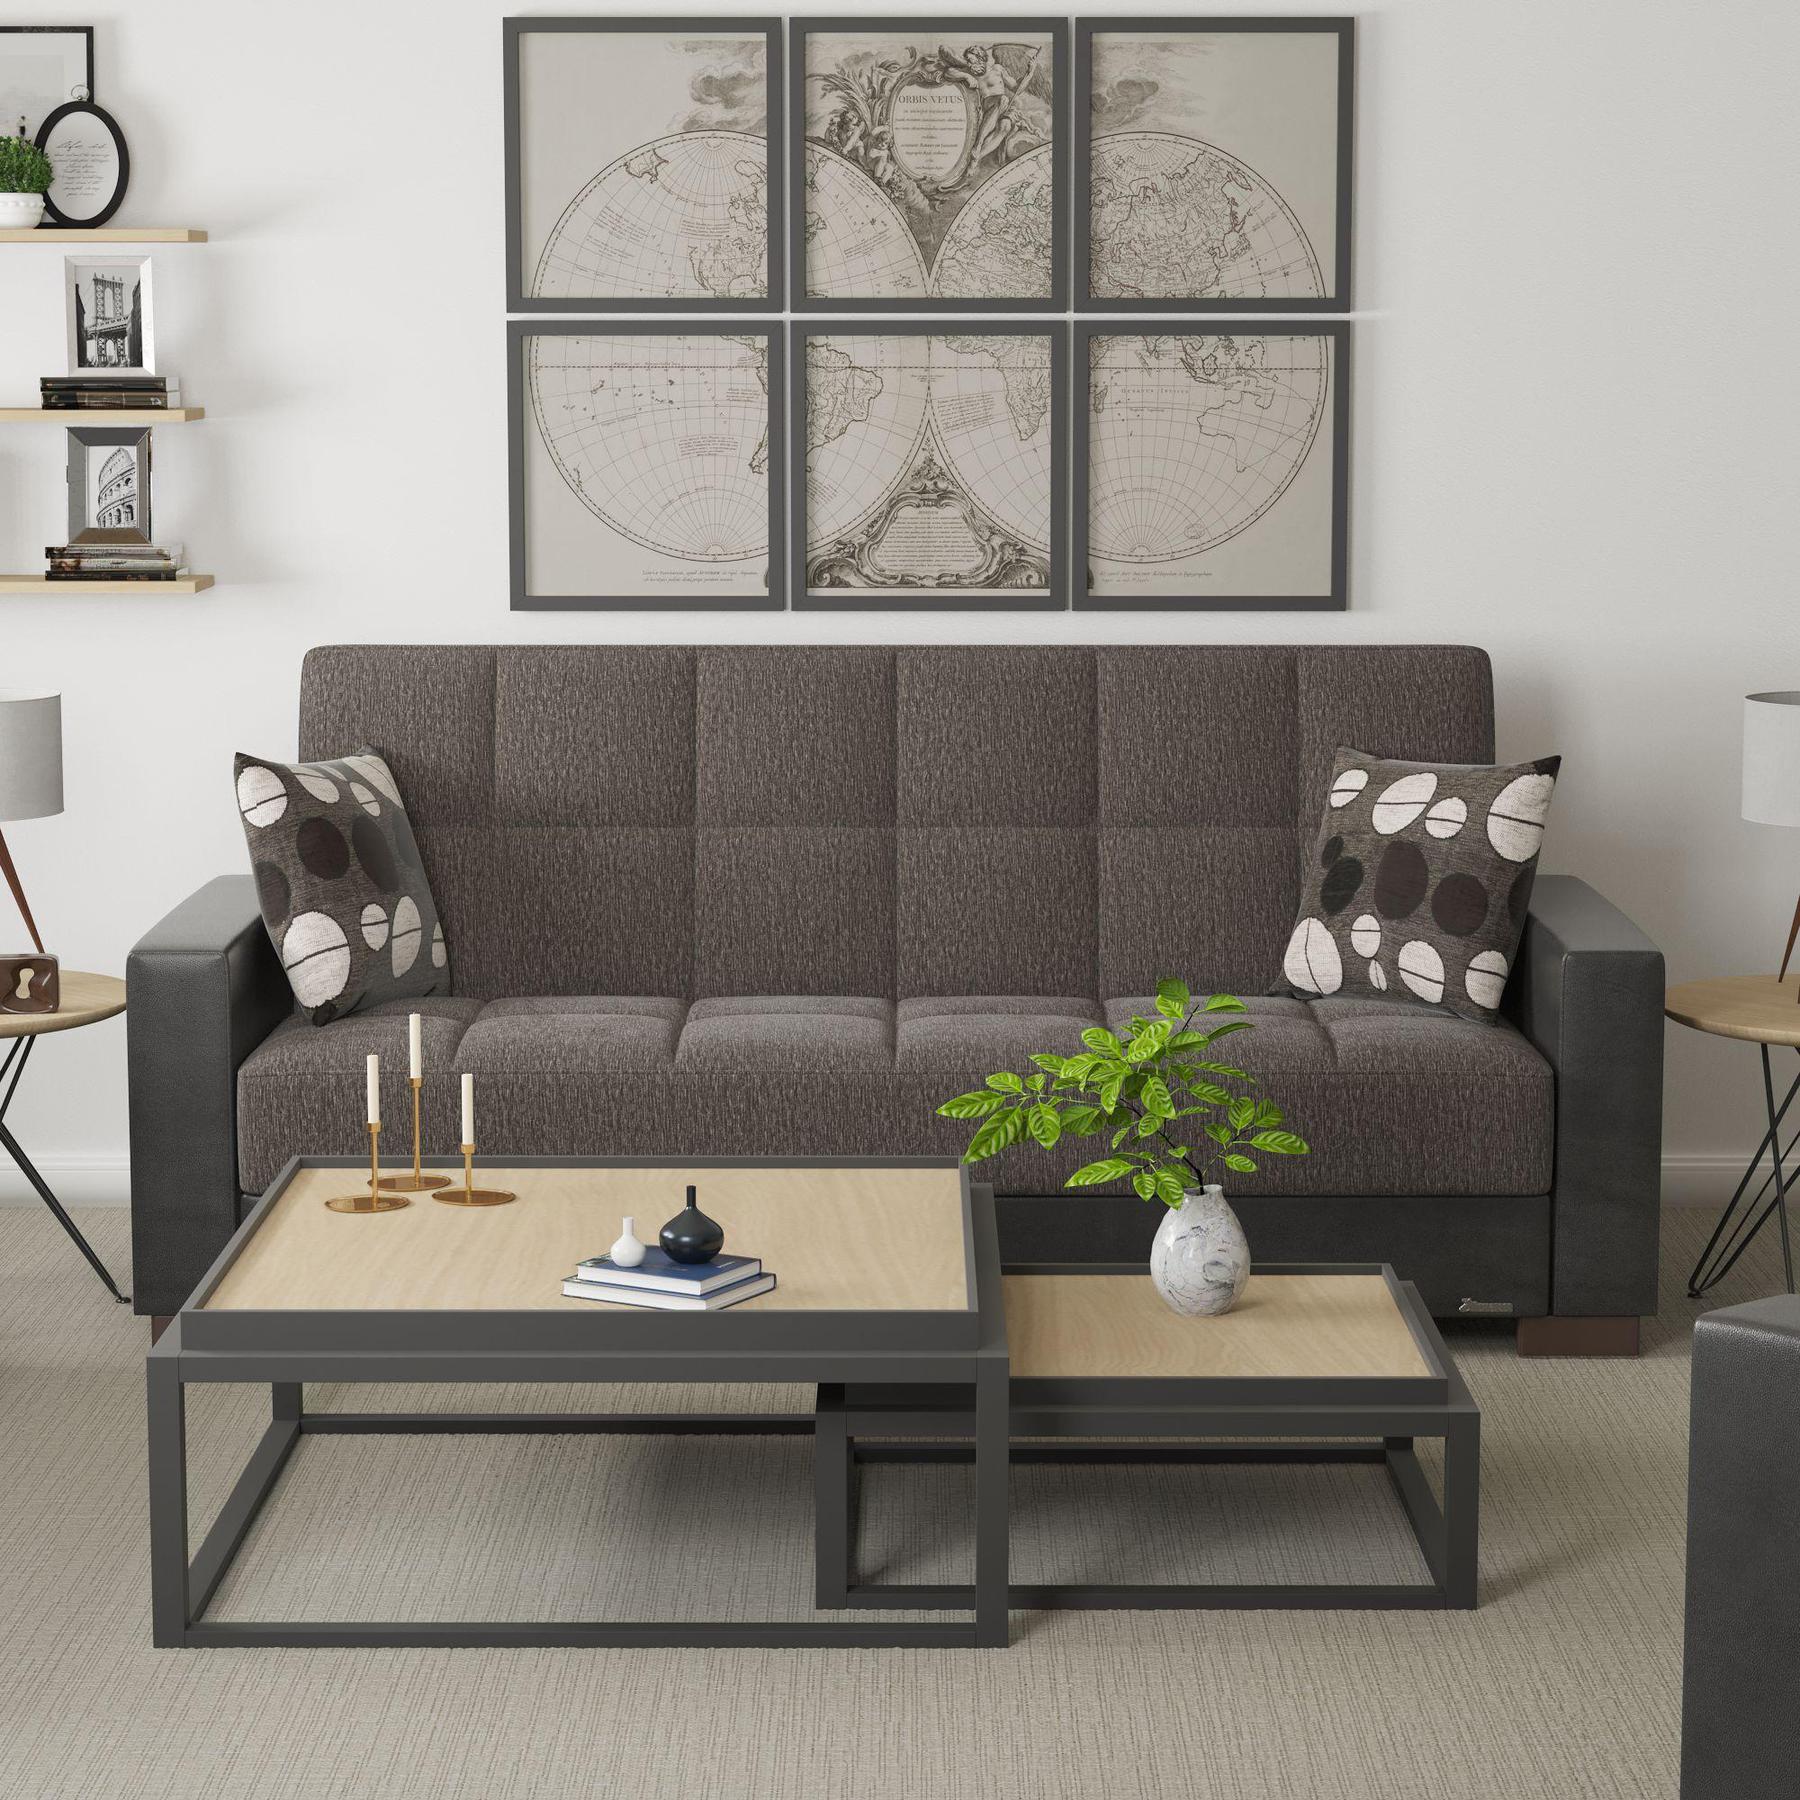 Modern design, Dark Slate Gray, Black , Chenille, Artificial Leather upholstered convertible sleeper Sofabed with underseat storage from Voyage Track by Ottomanson in living room lifestyle setting by itself. This Sofabed measures 90 inches width by 36 inches depth by 41 inches height.